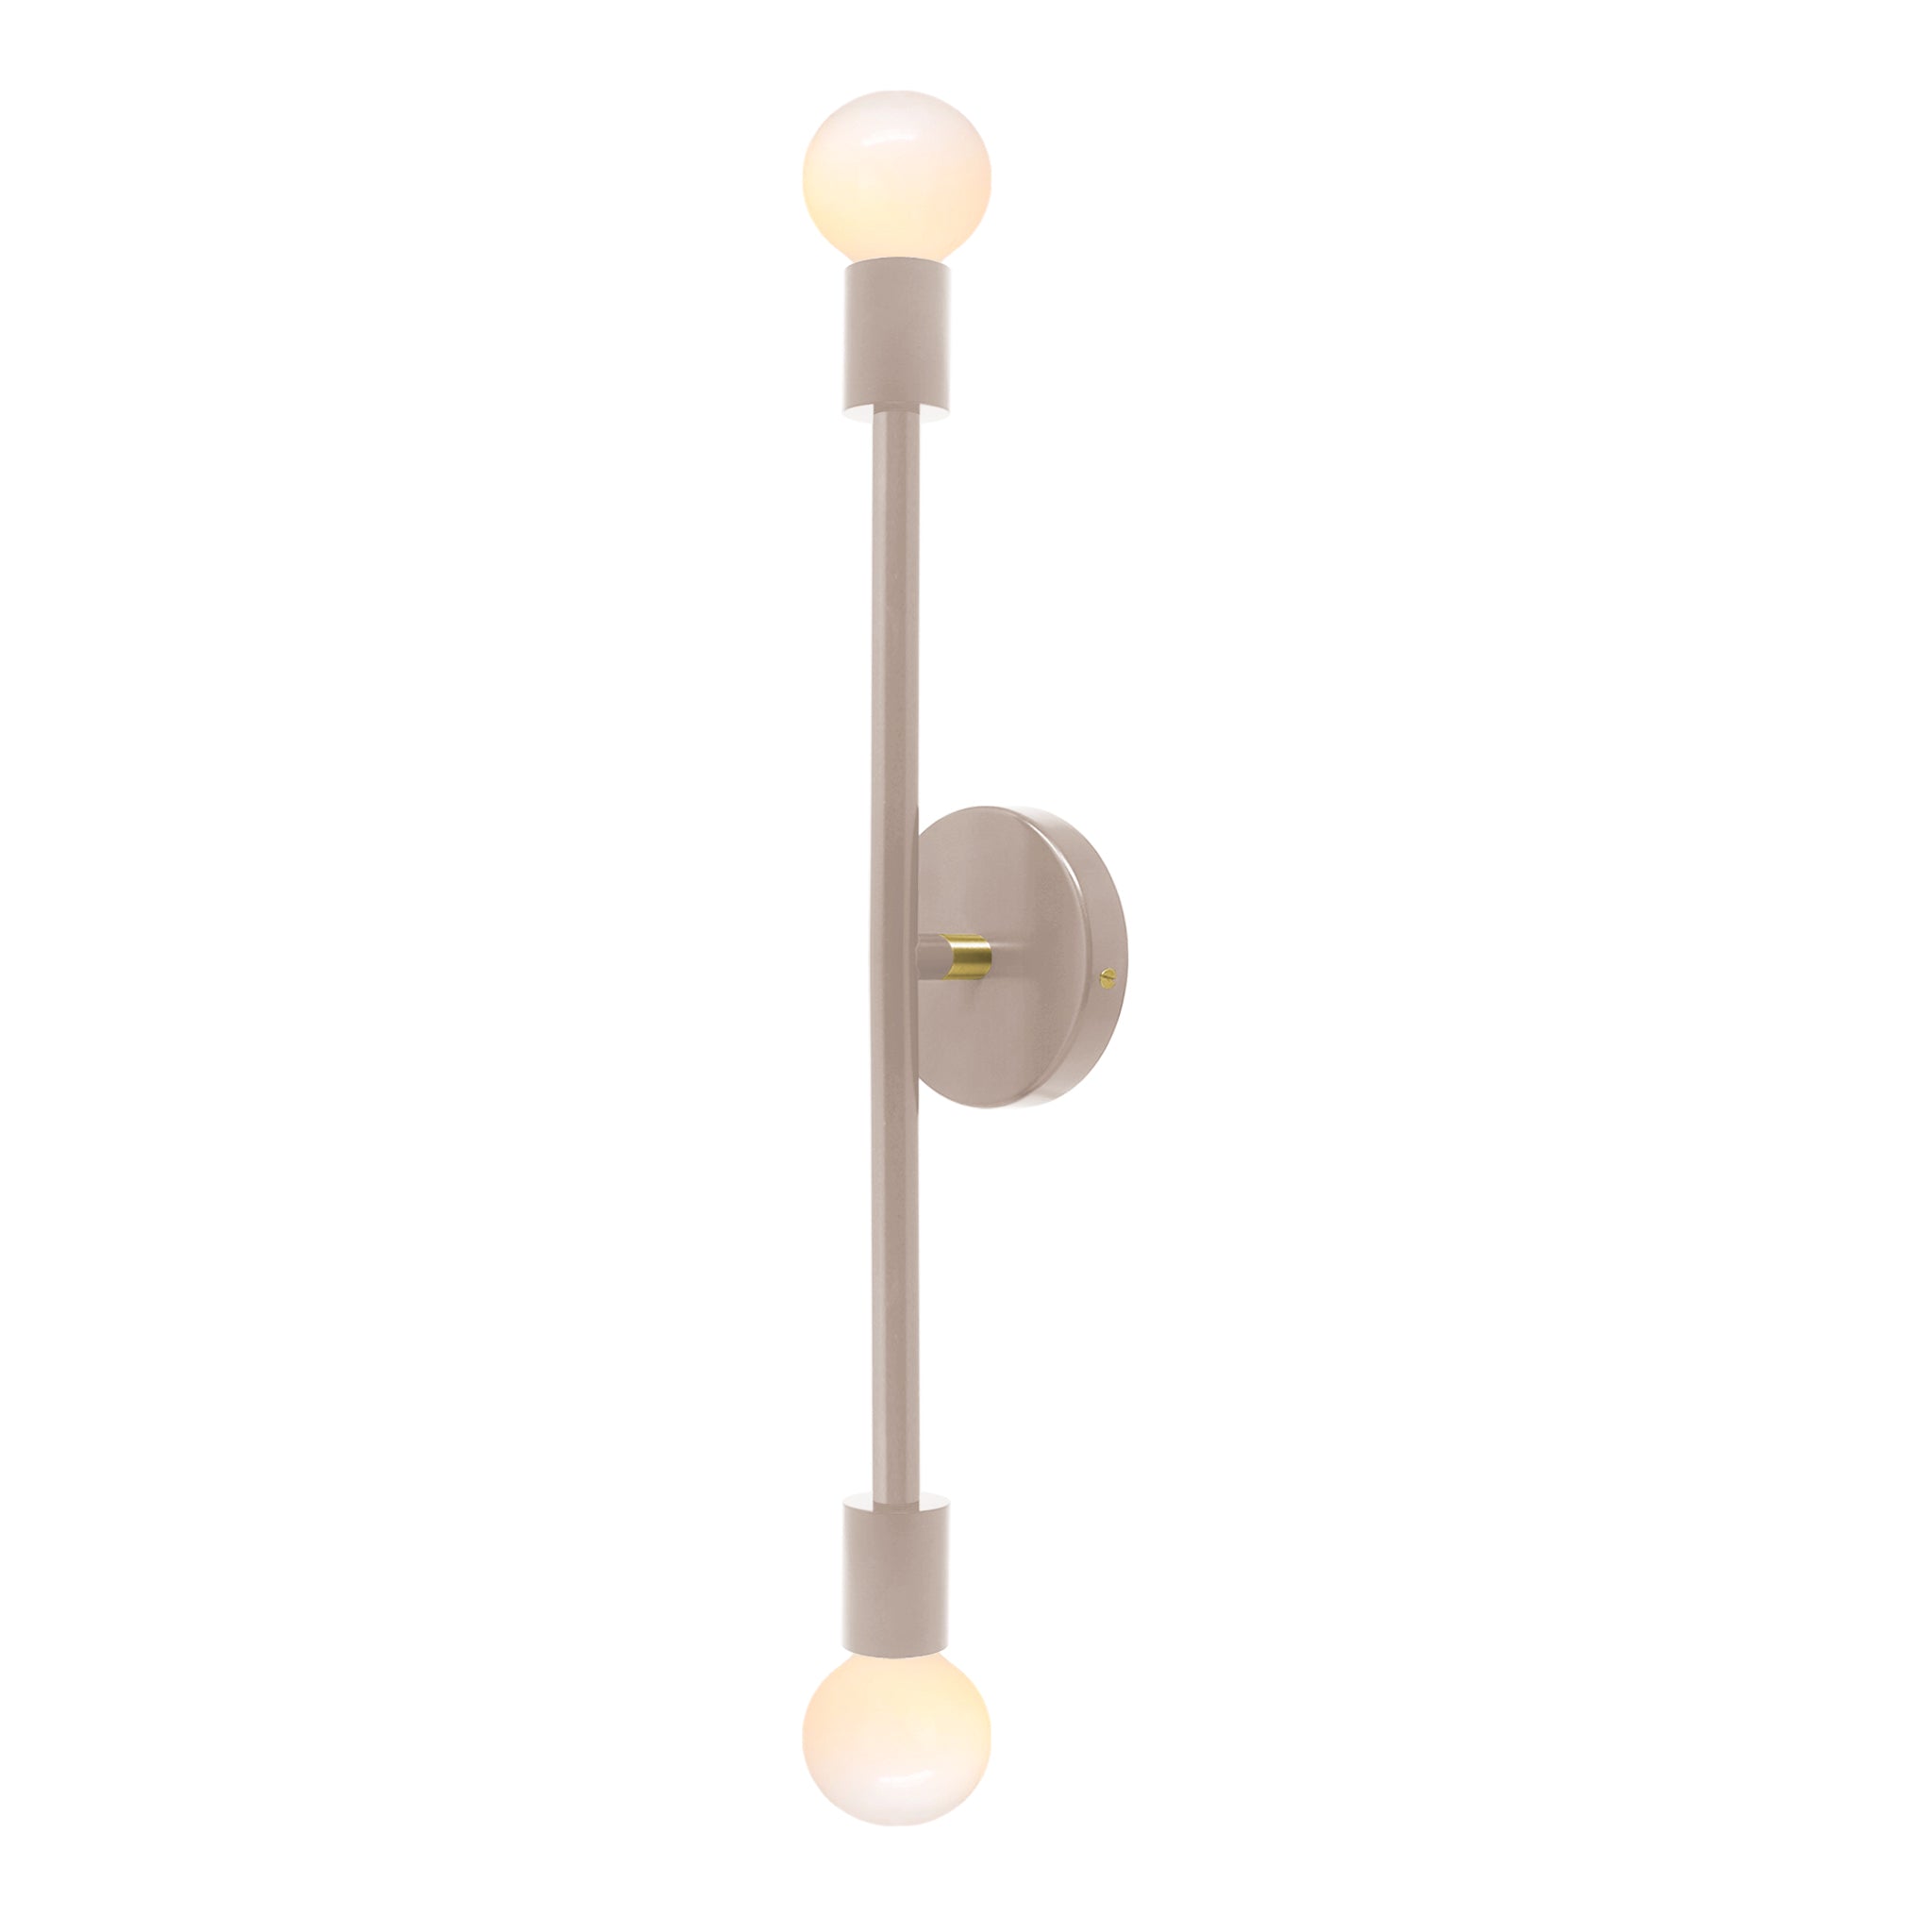 Brass and barely color Pilot sconce 23" Dutton Brown lighting